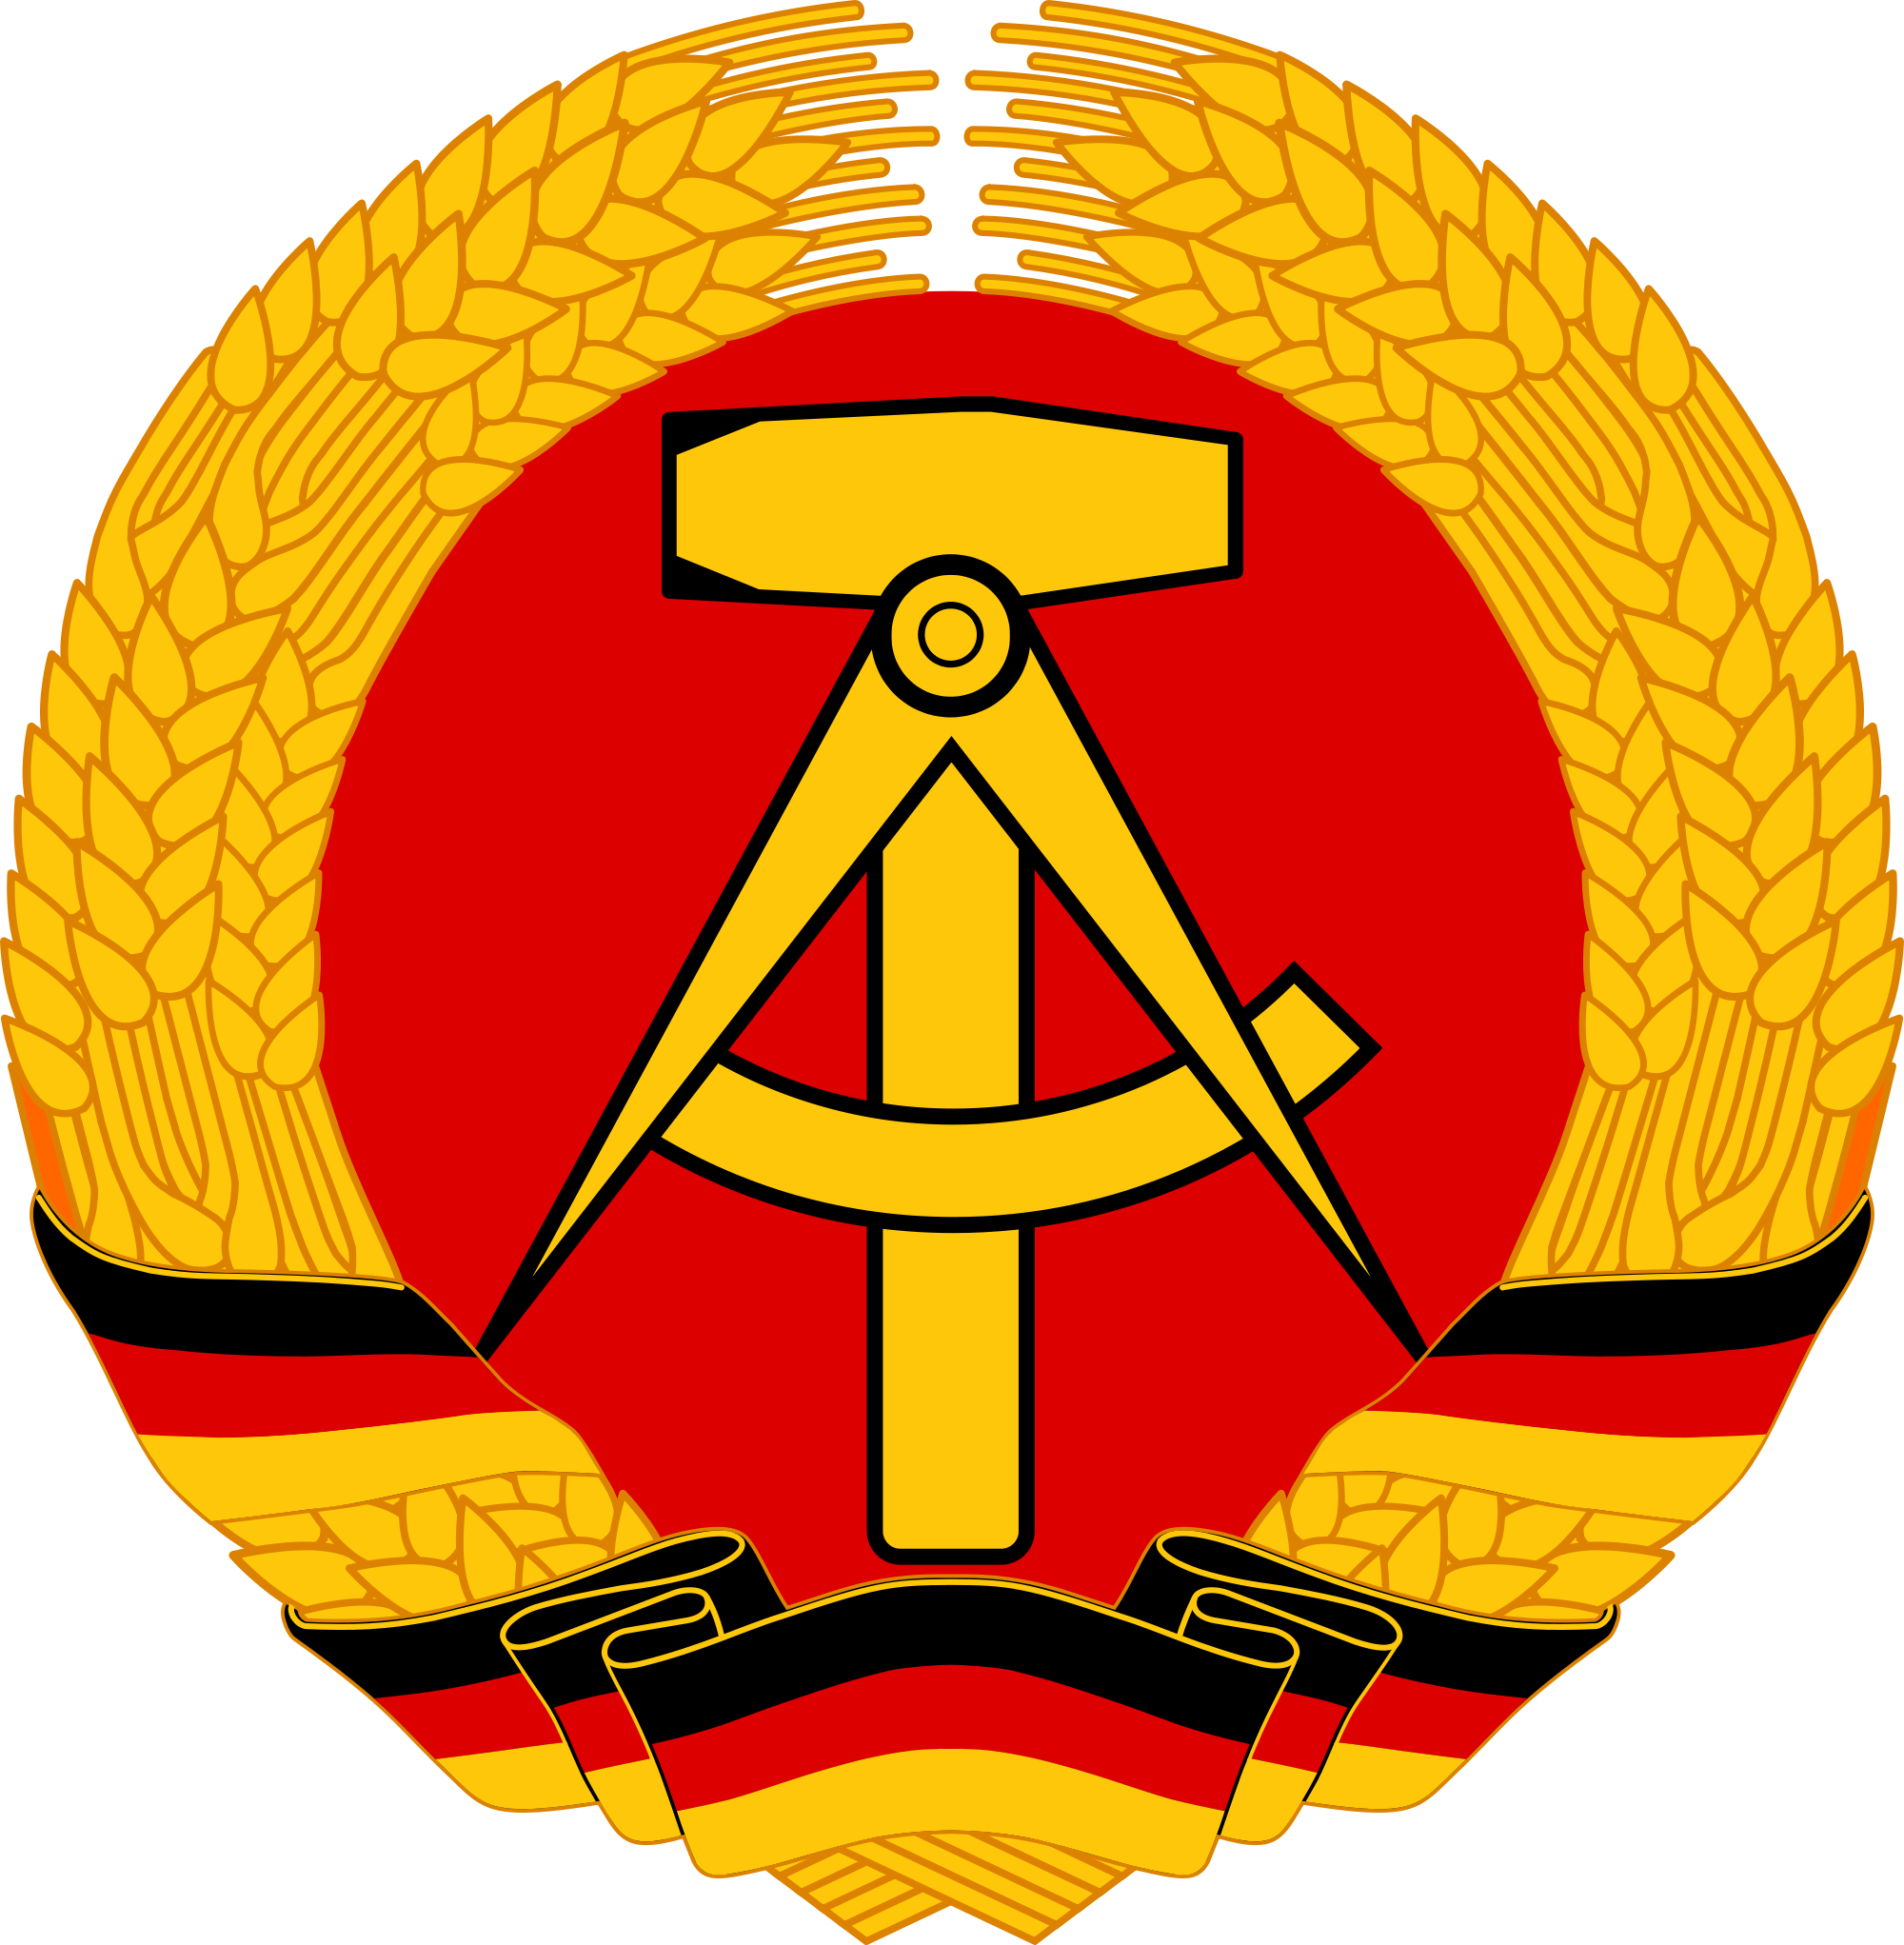 State Arms Of German Democratic Republic - East German Coat Of Arms (2000x2043)